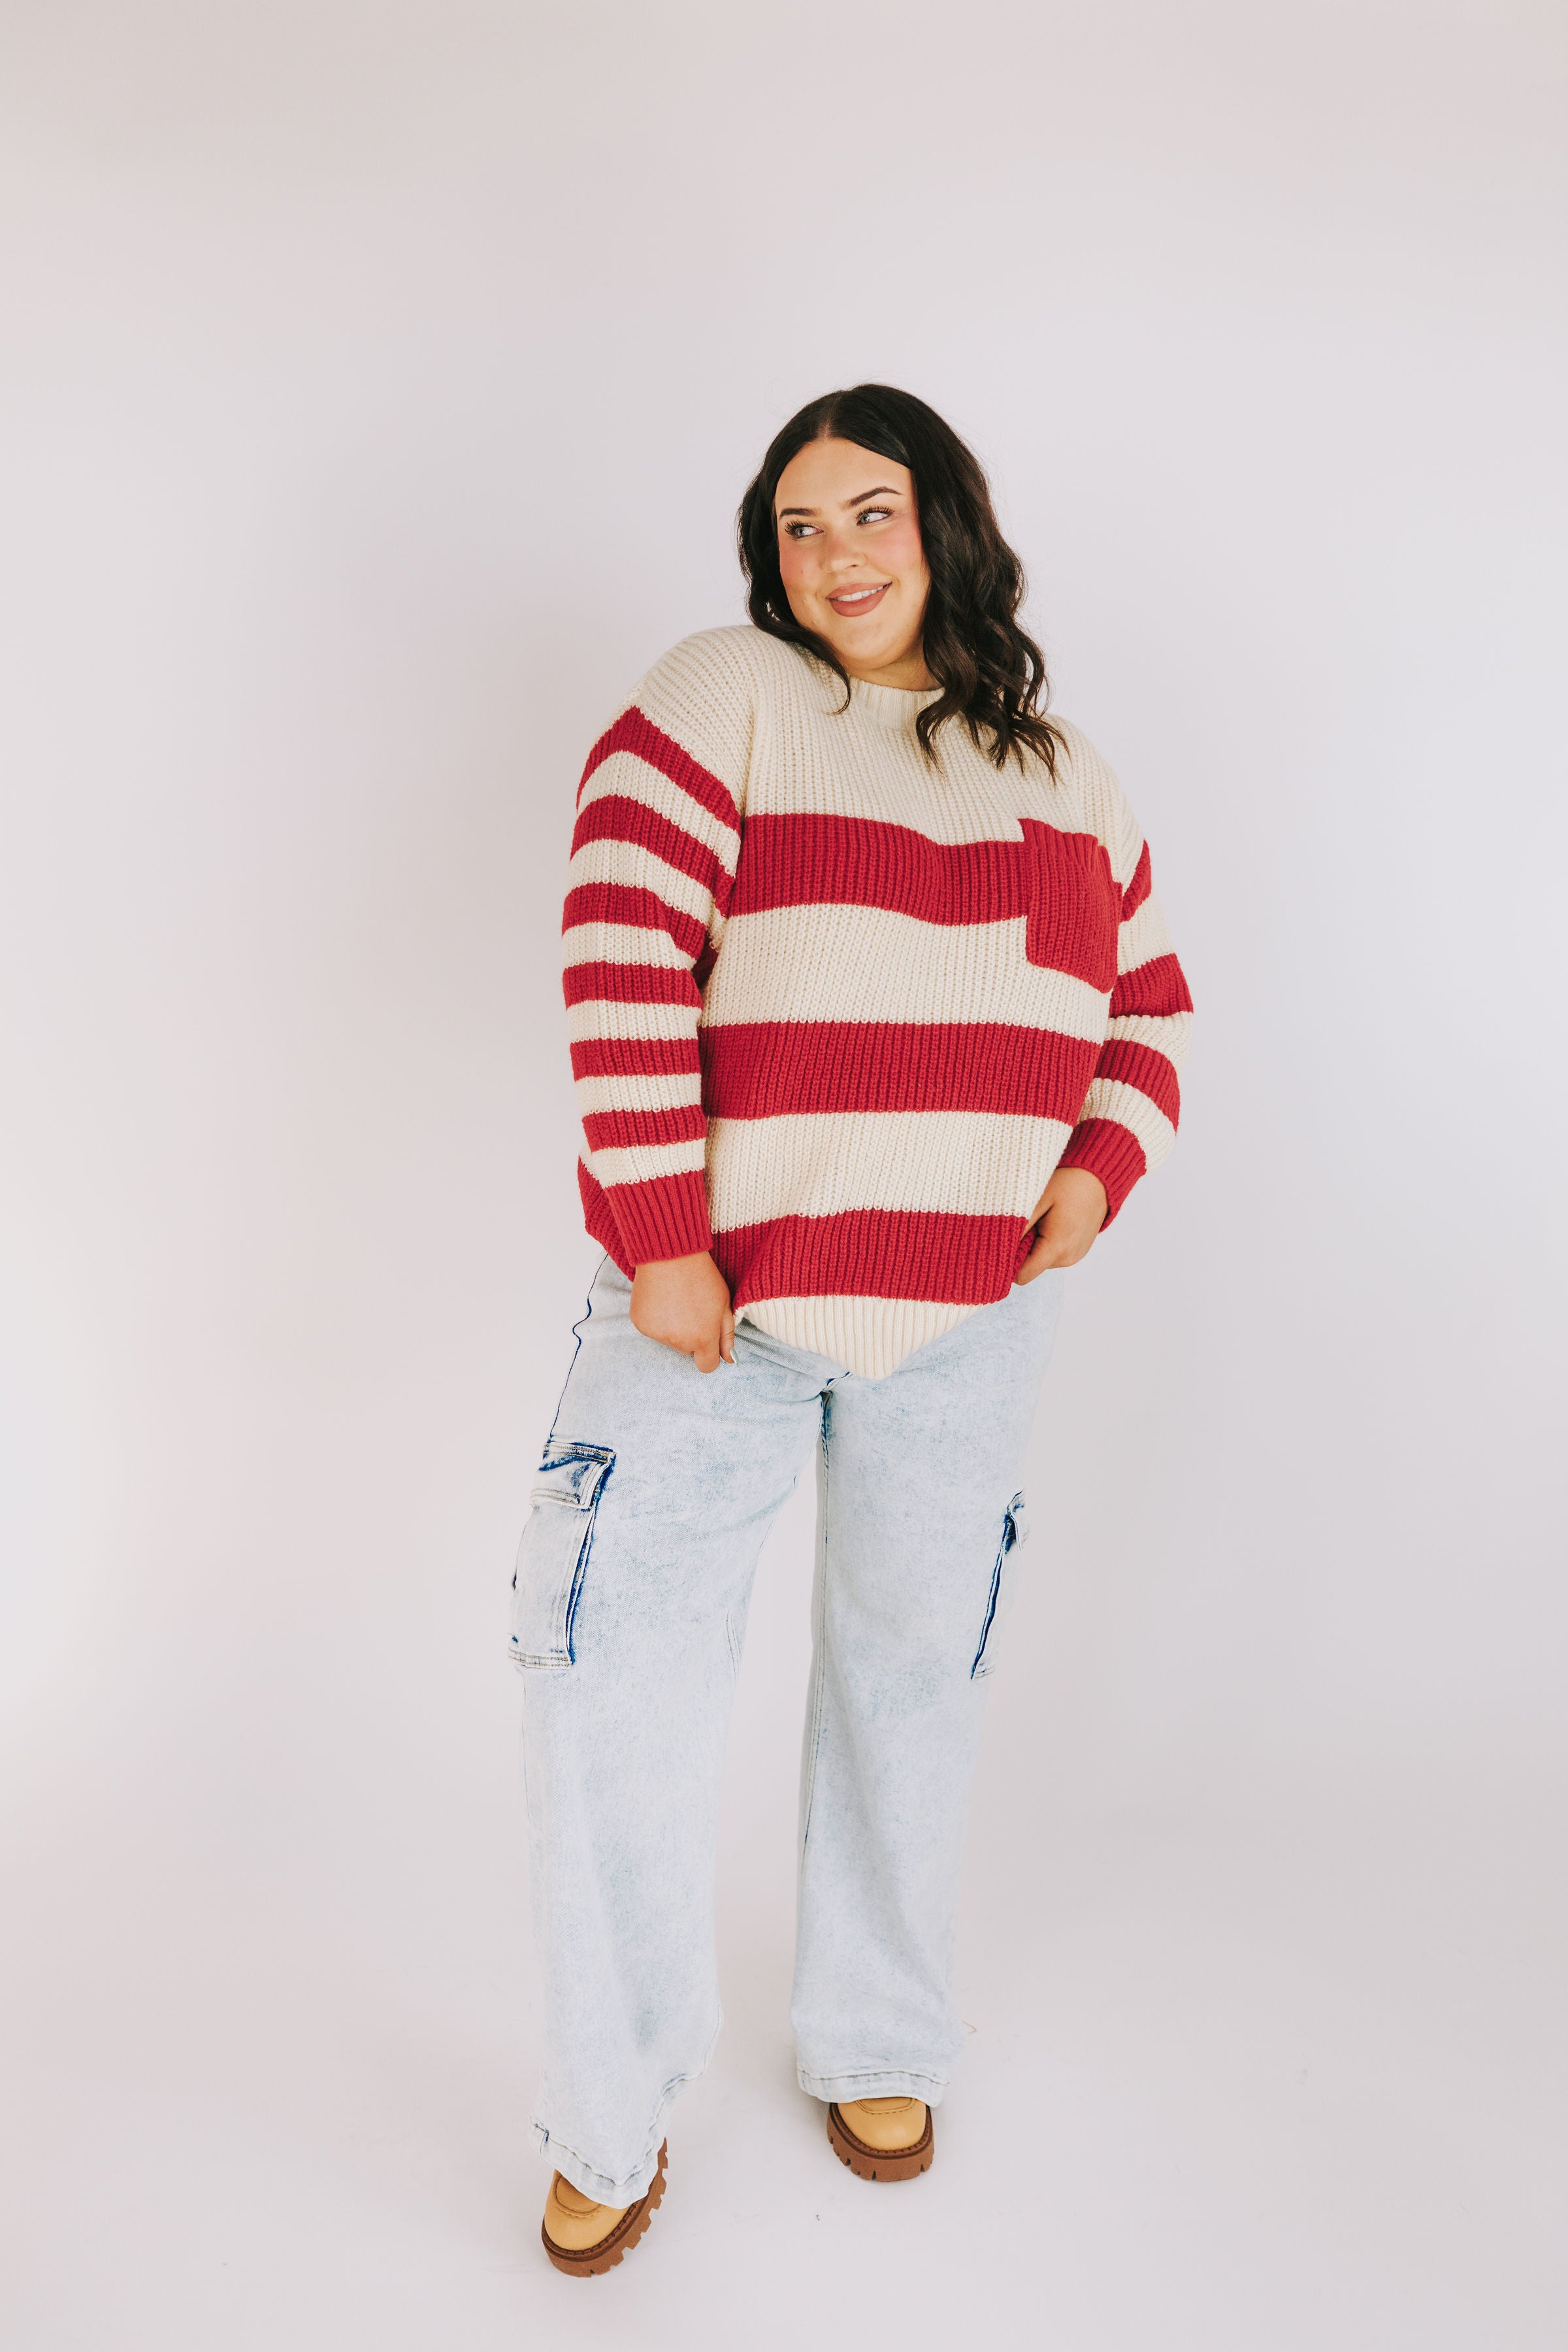 PLUS SIZE - Out Of My Mind Sweater - New Color!